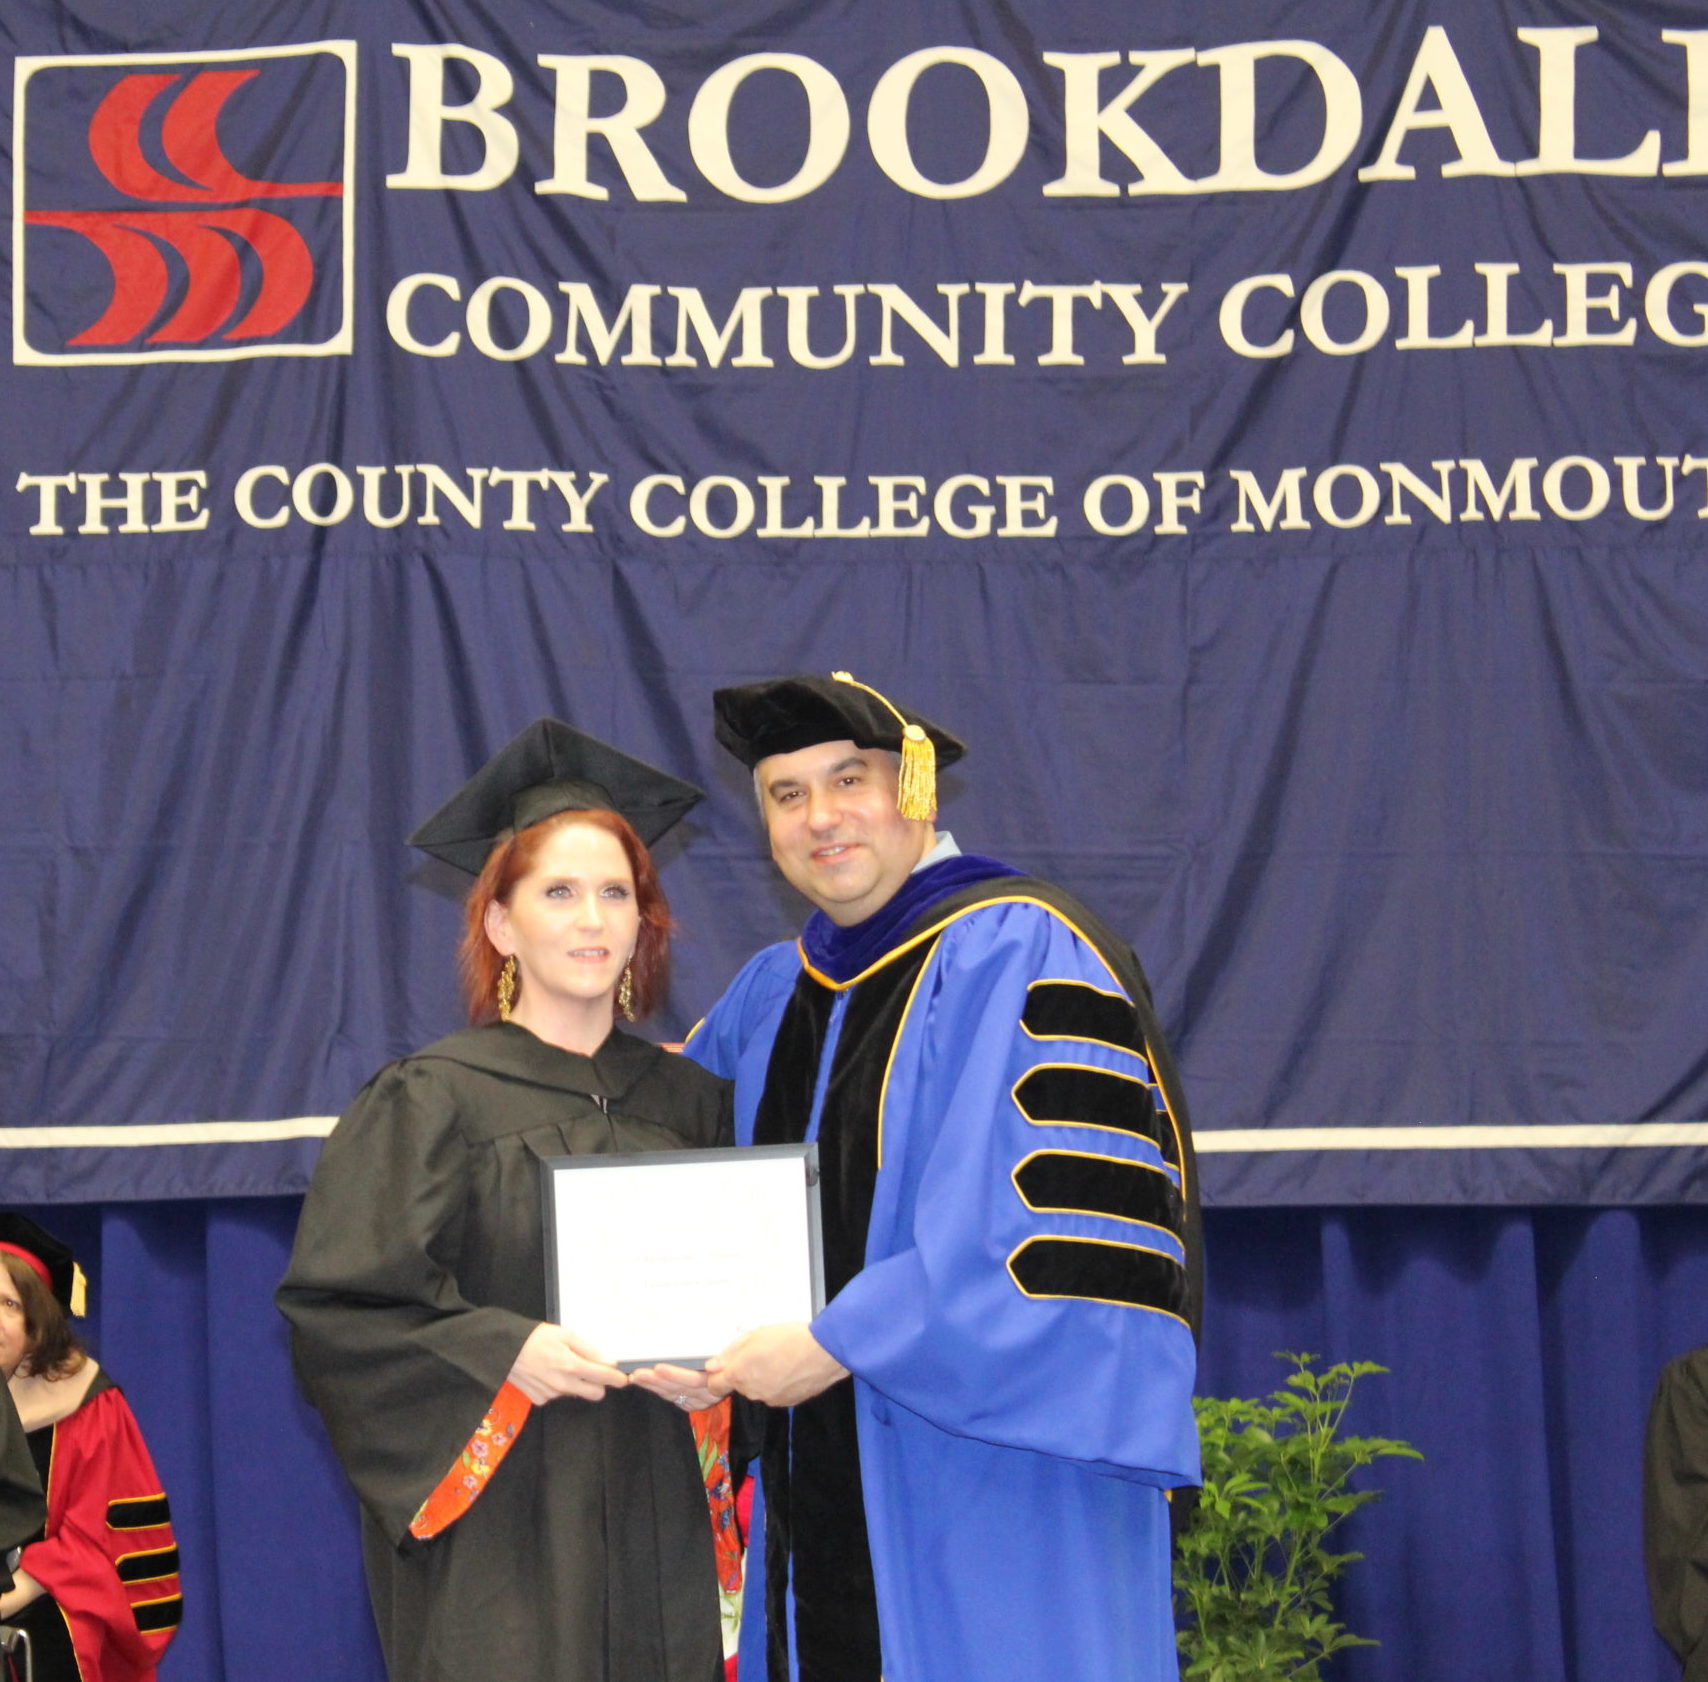 Nominations Open for the Distinguished Alumni Award at Brookdale